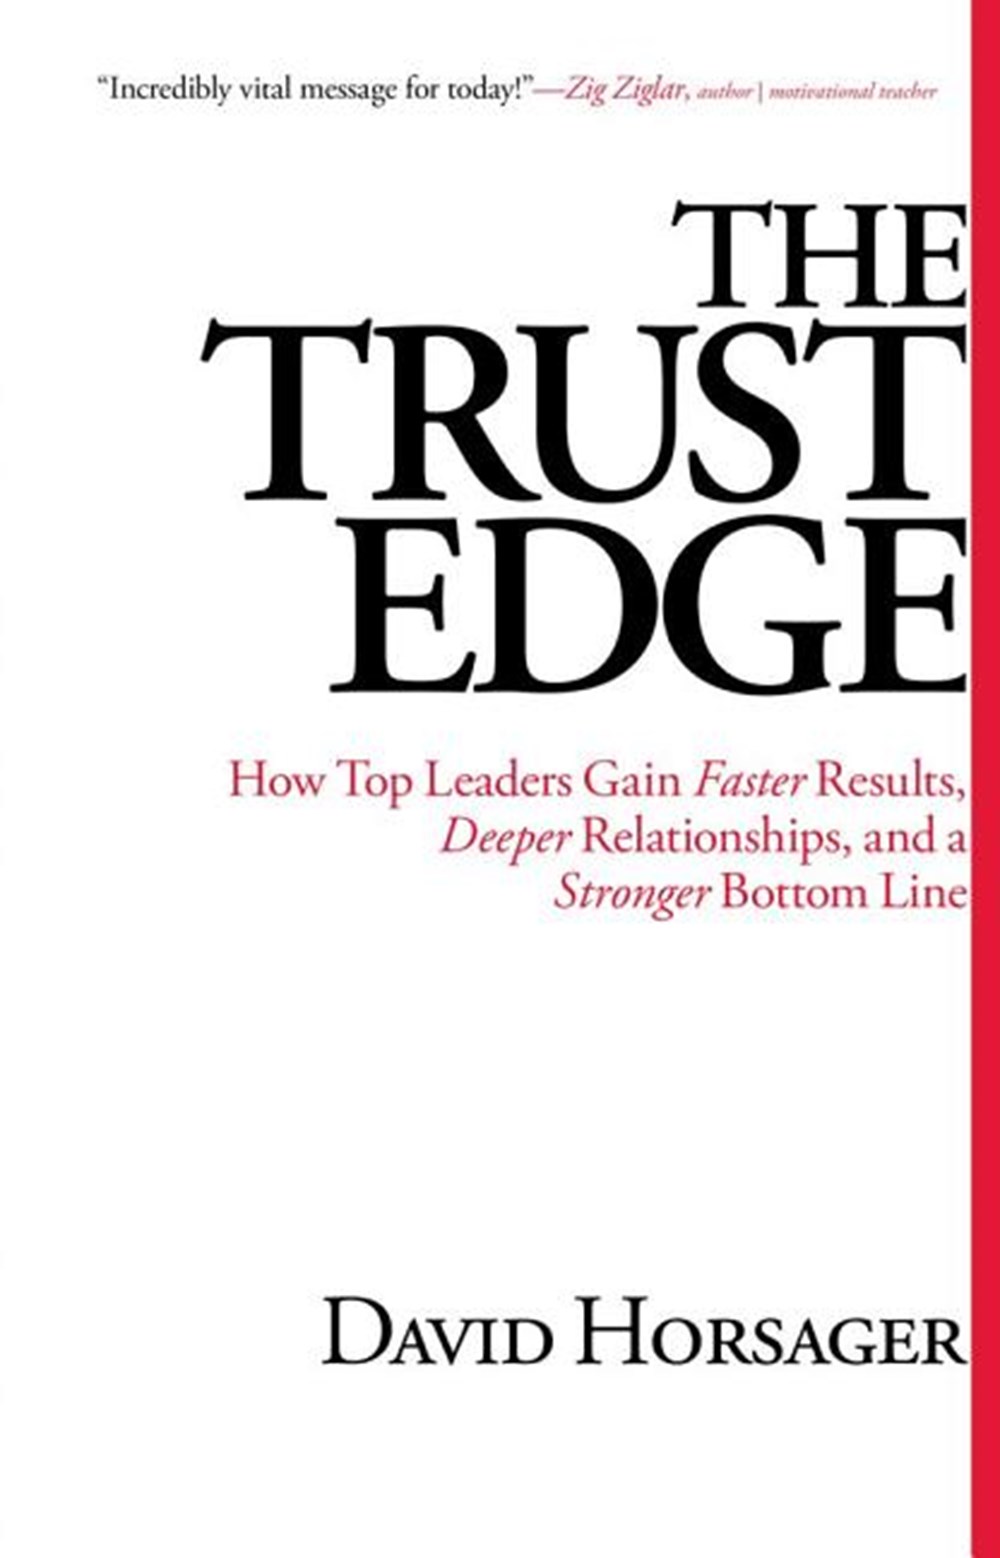 Trust Edge How Top Leaders Gain Faster Results, Deeper Relationships, and a Stronger Bottom Line